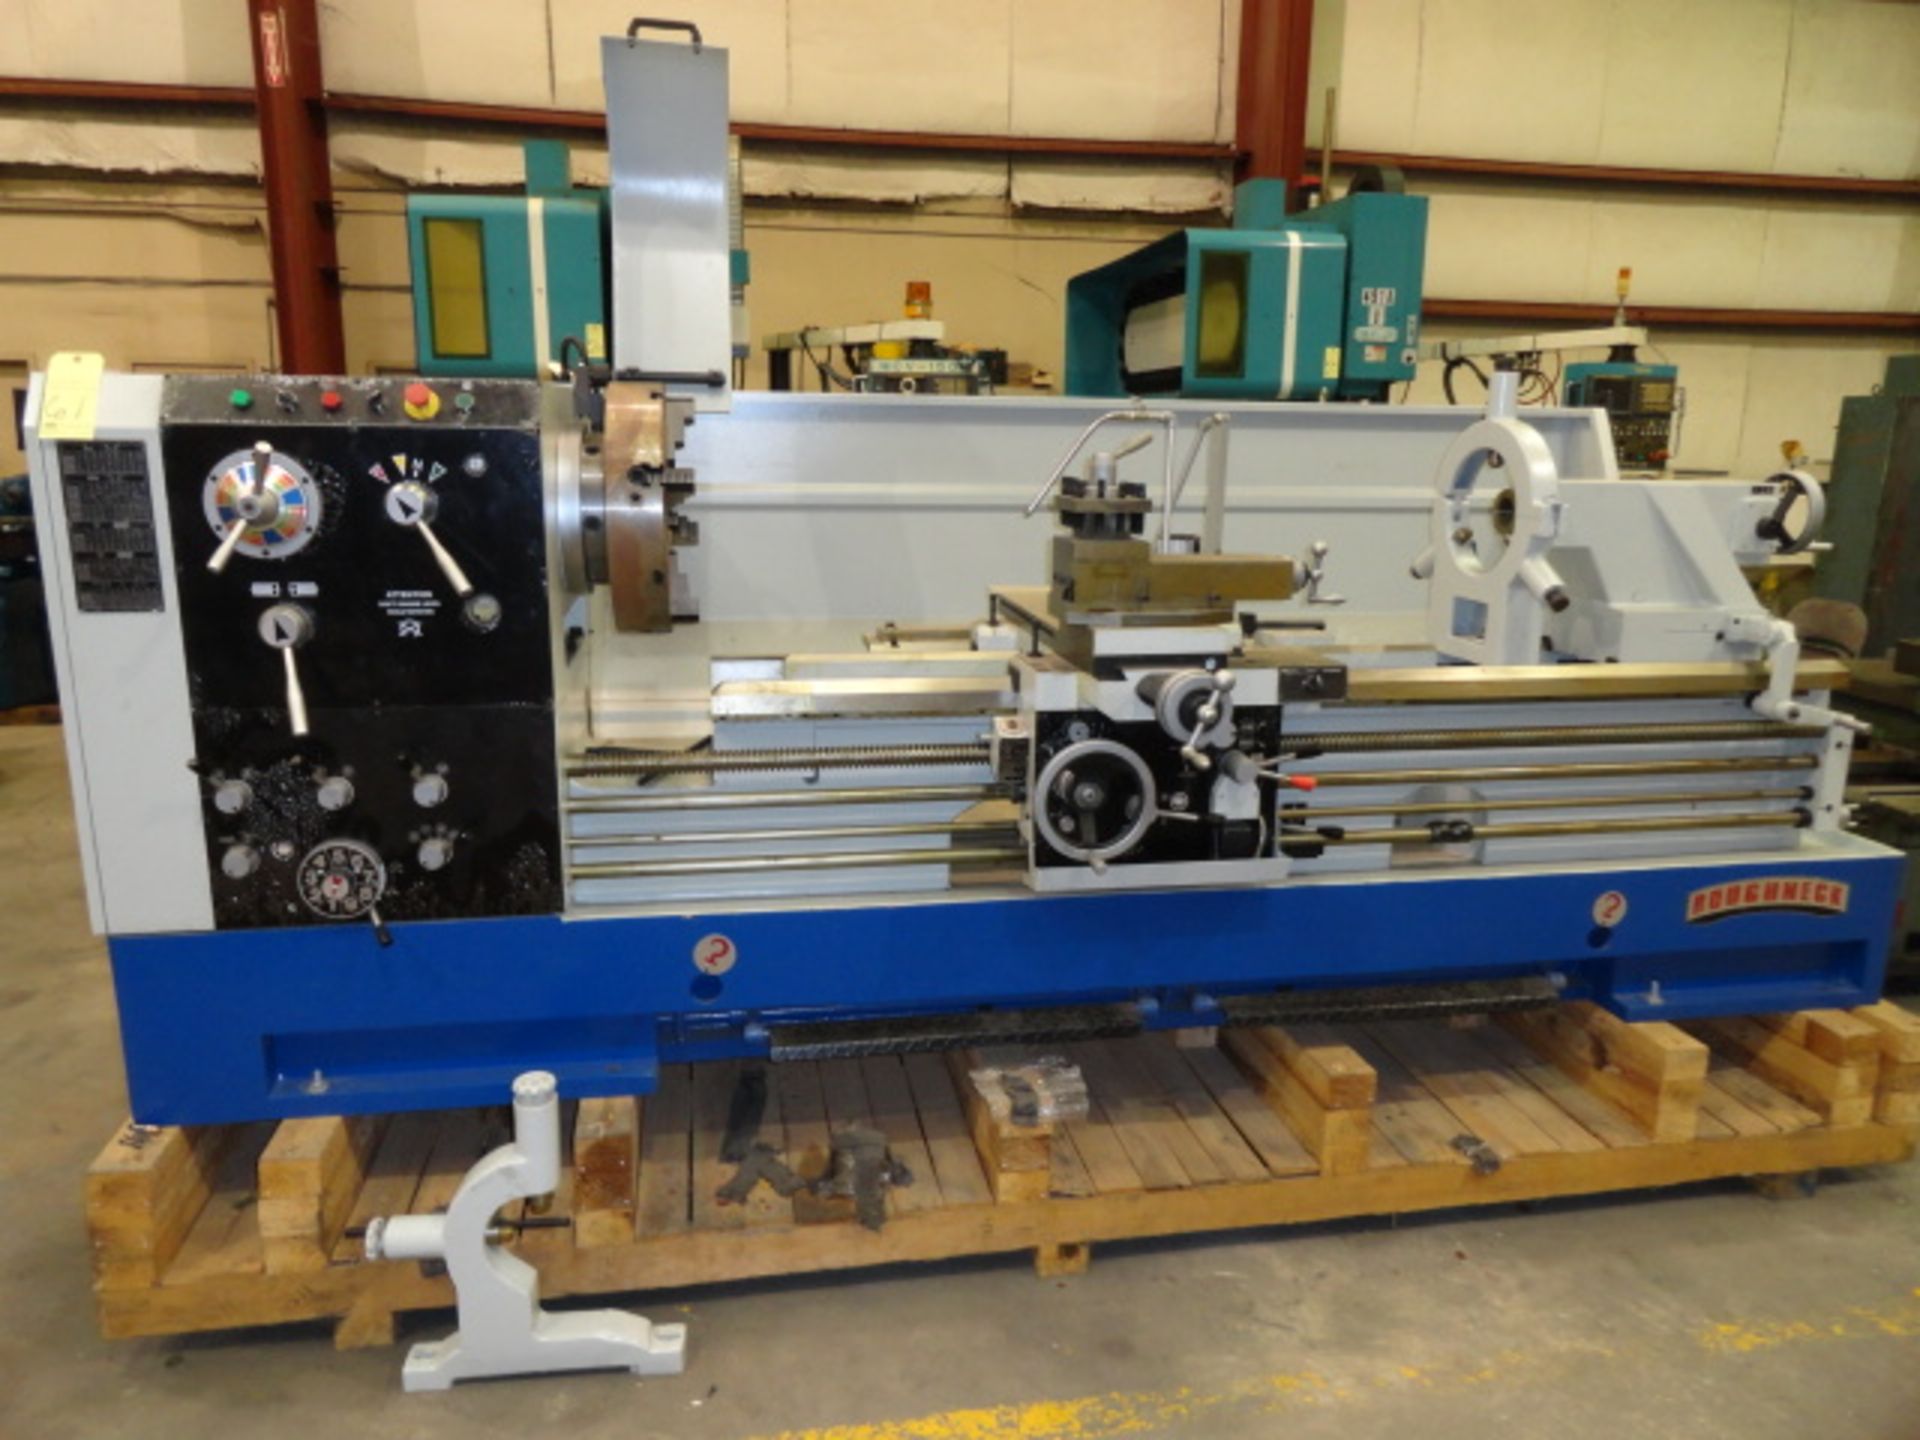 GAP BED ENGINE LATHE, ROUGHNECK 26" X 80" (CHU SHING) (NEW), 17-3/8” sw. over crosslide, 38-1/8” sw.